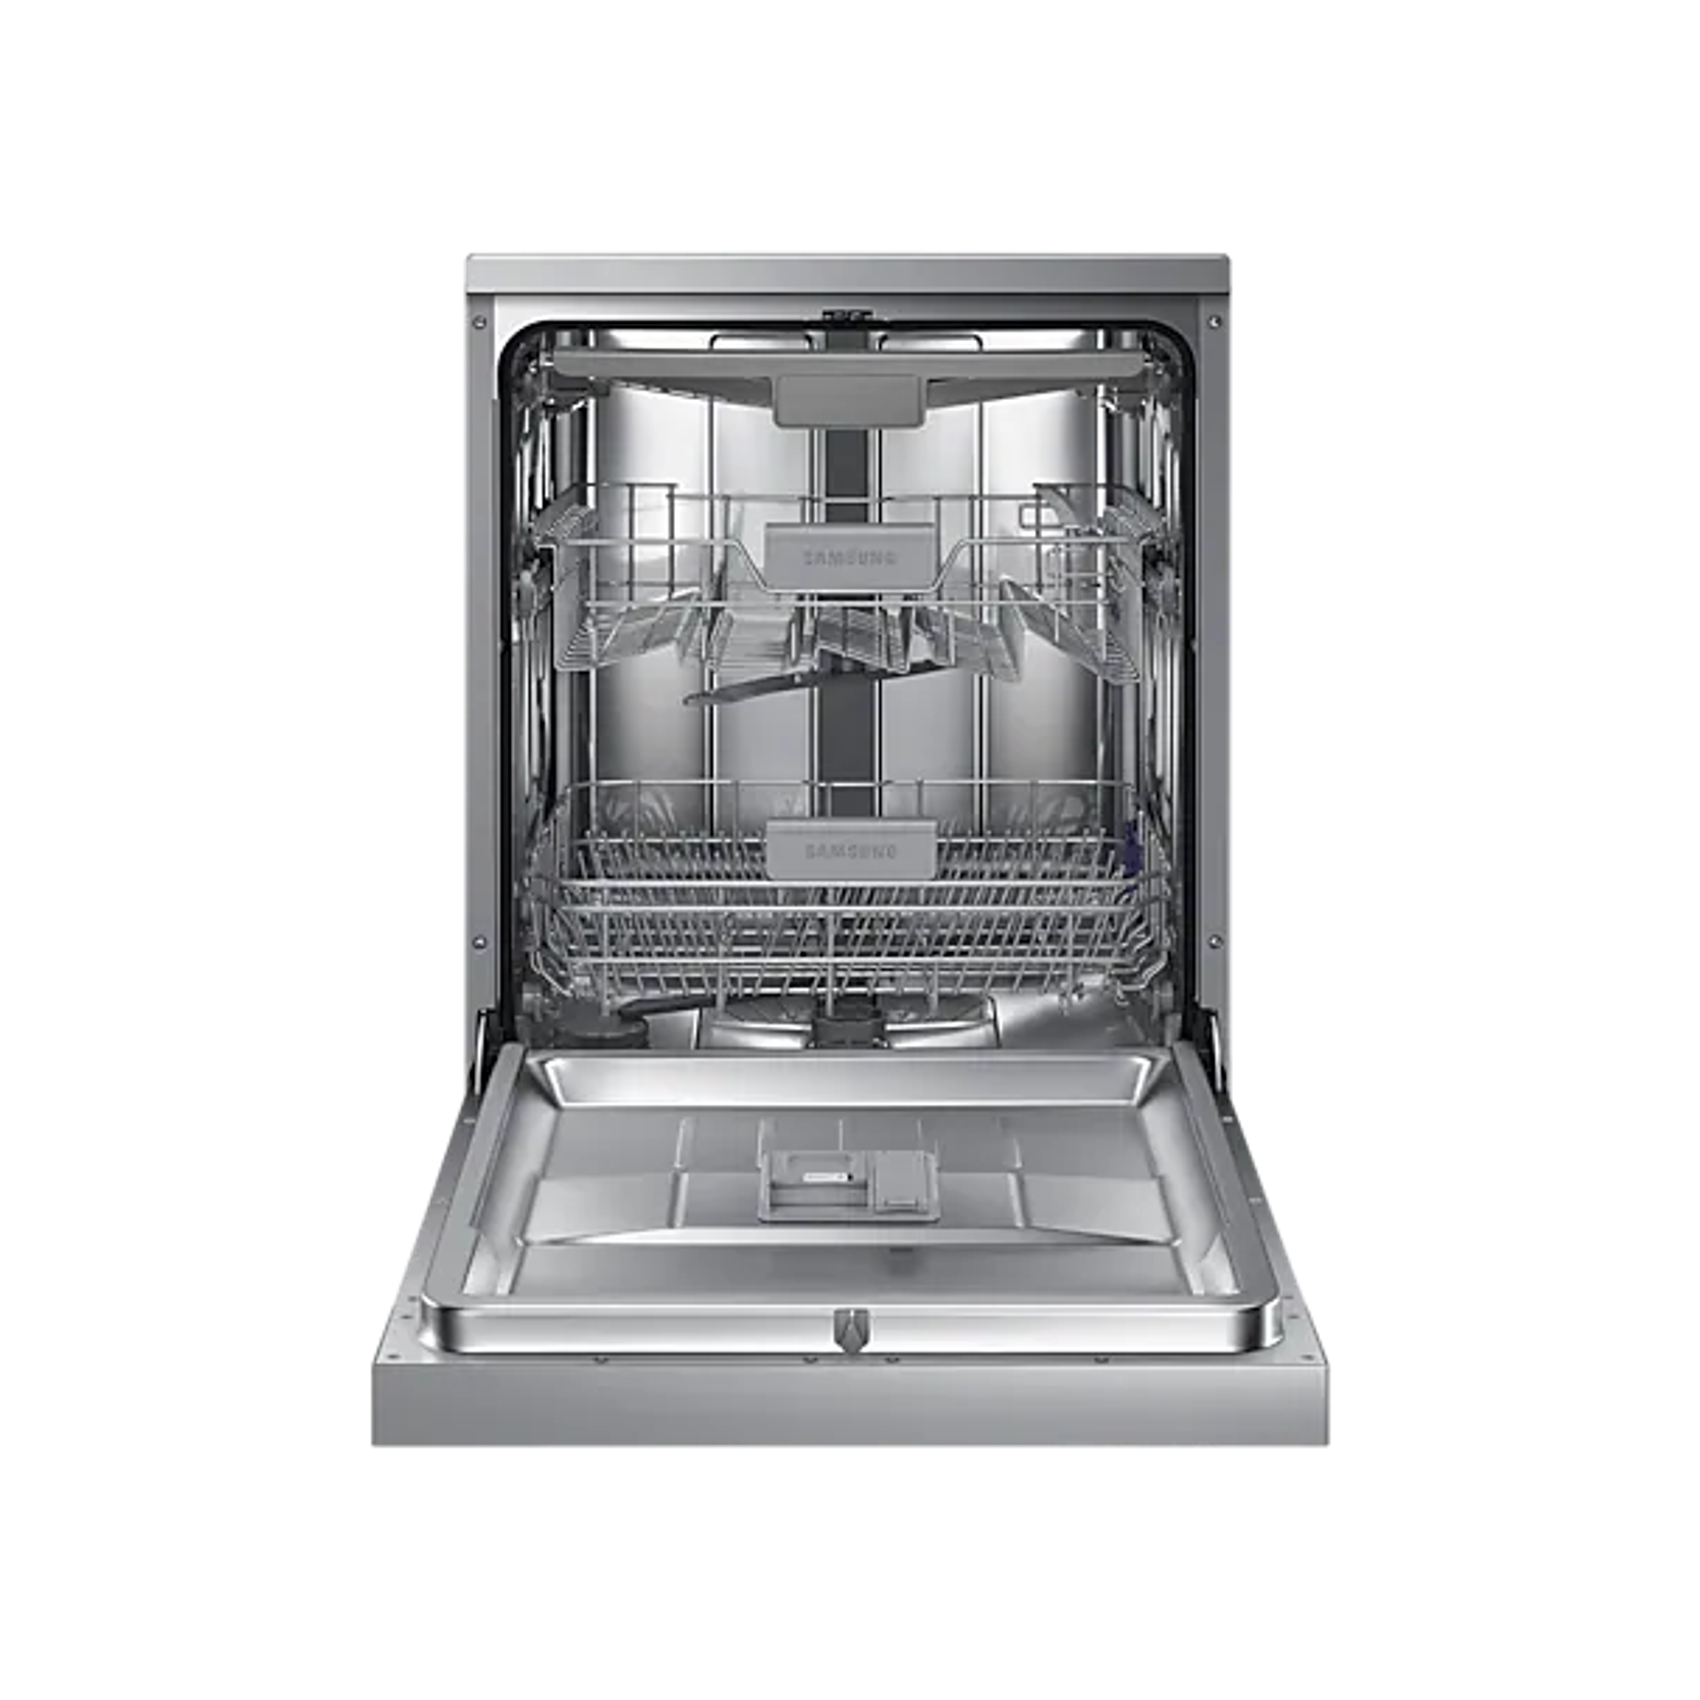 Samsung 14 Place Dishwasher with Wide Led Display - Silver (Photo: 6)